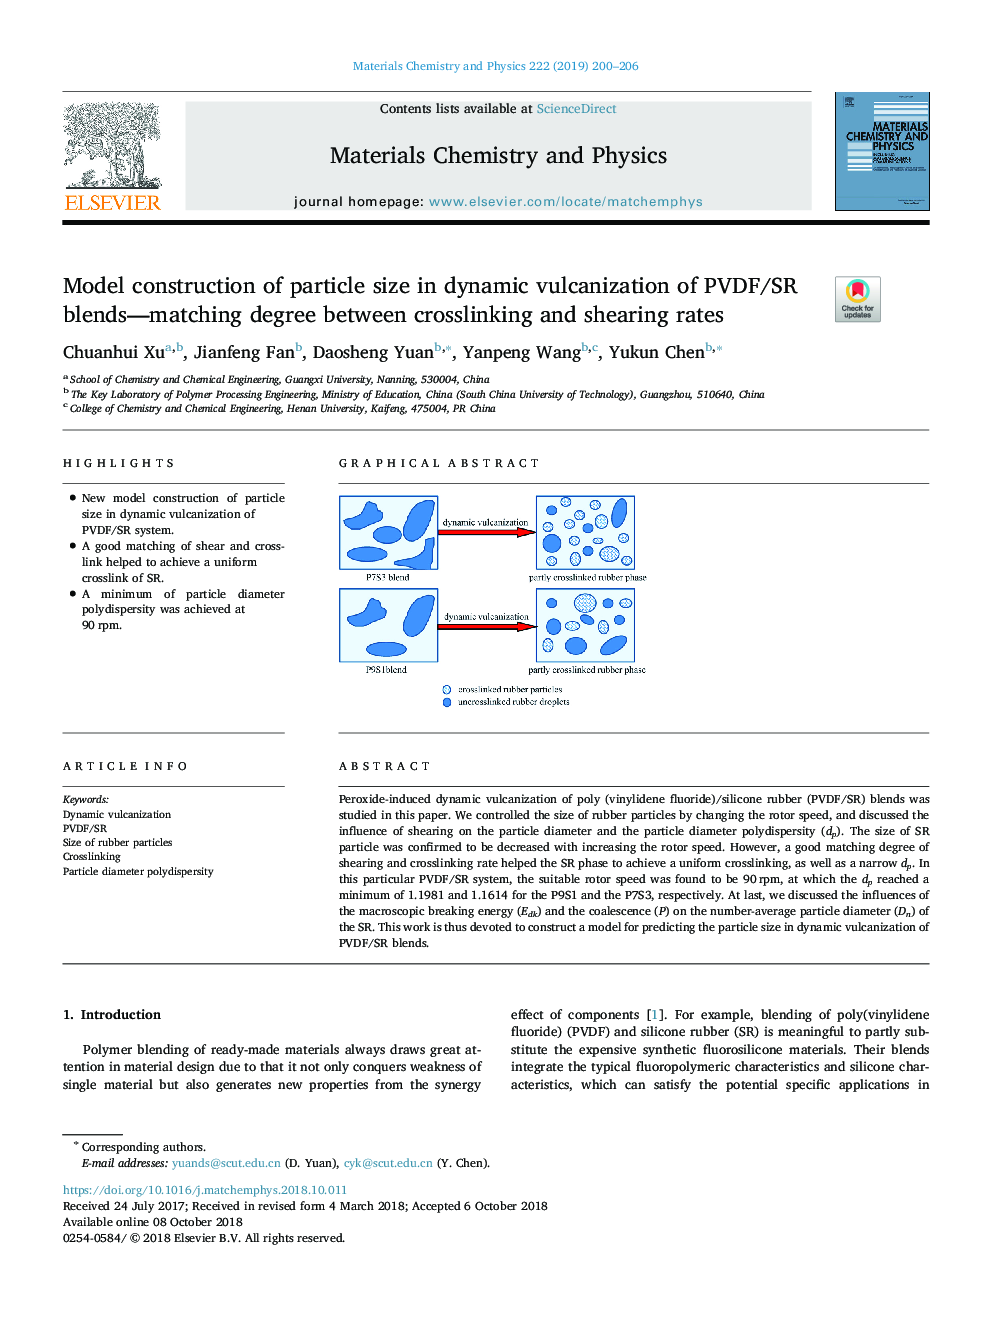 Model construction of particle size in dynamic vulcanization of PVDF/SR blends-matching degree between crosslinking and shearing rates